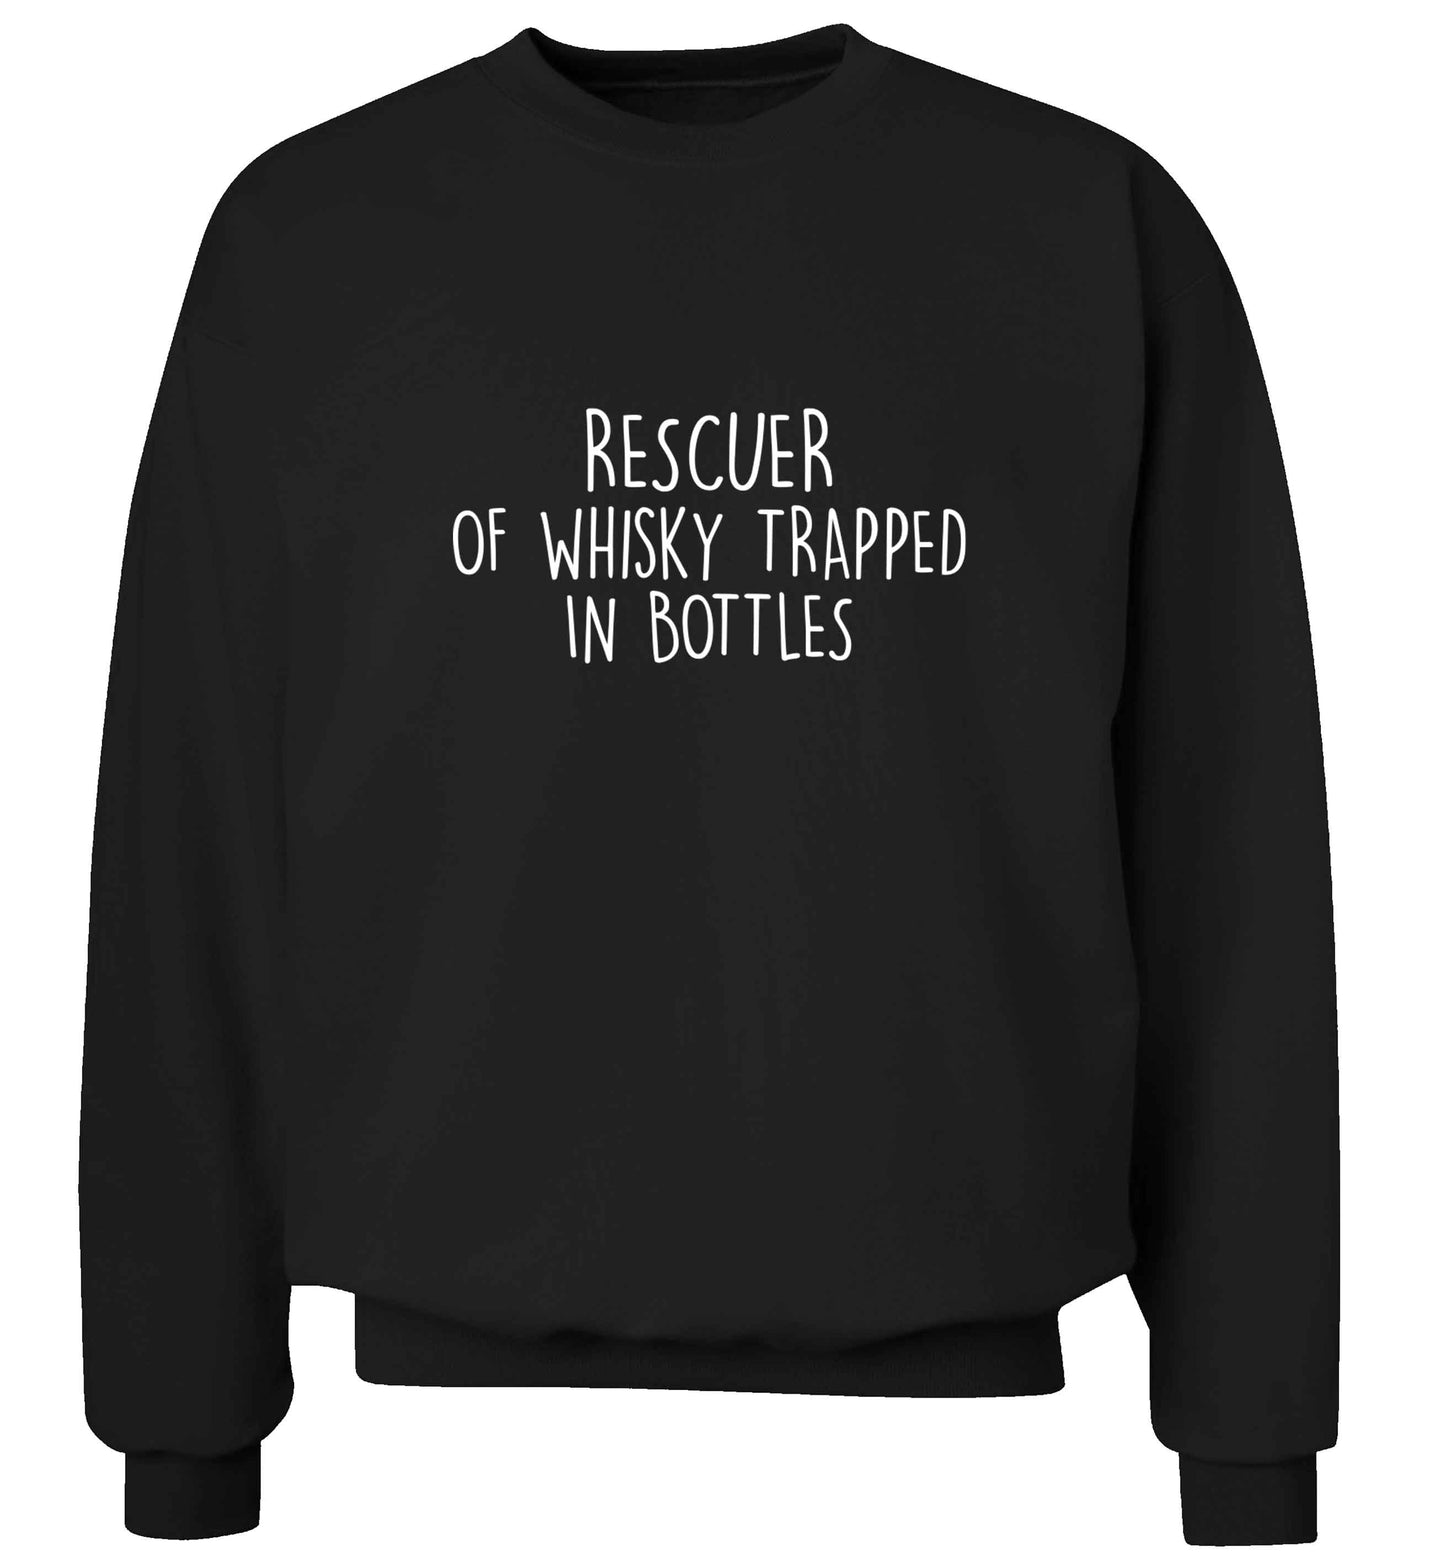 Rescuer of whisky trapped in bottles adult's unisex black sweater 2XL